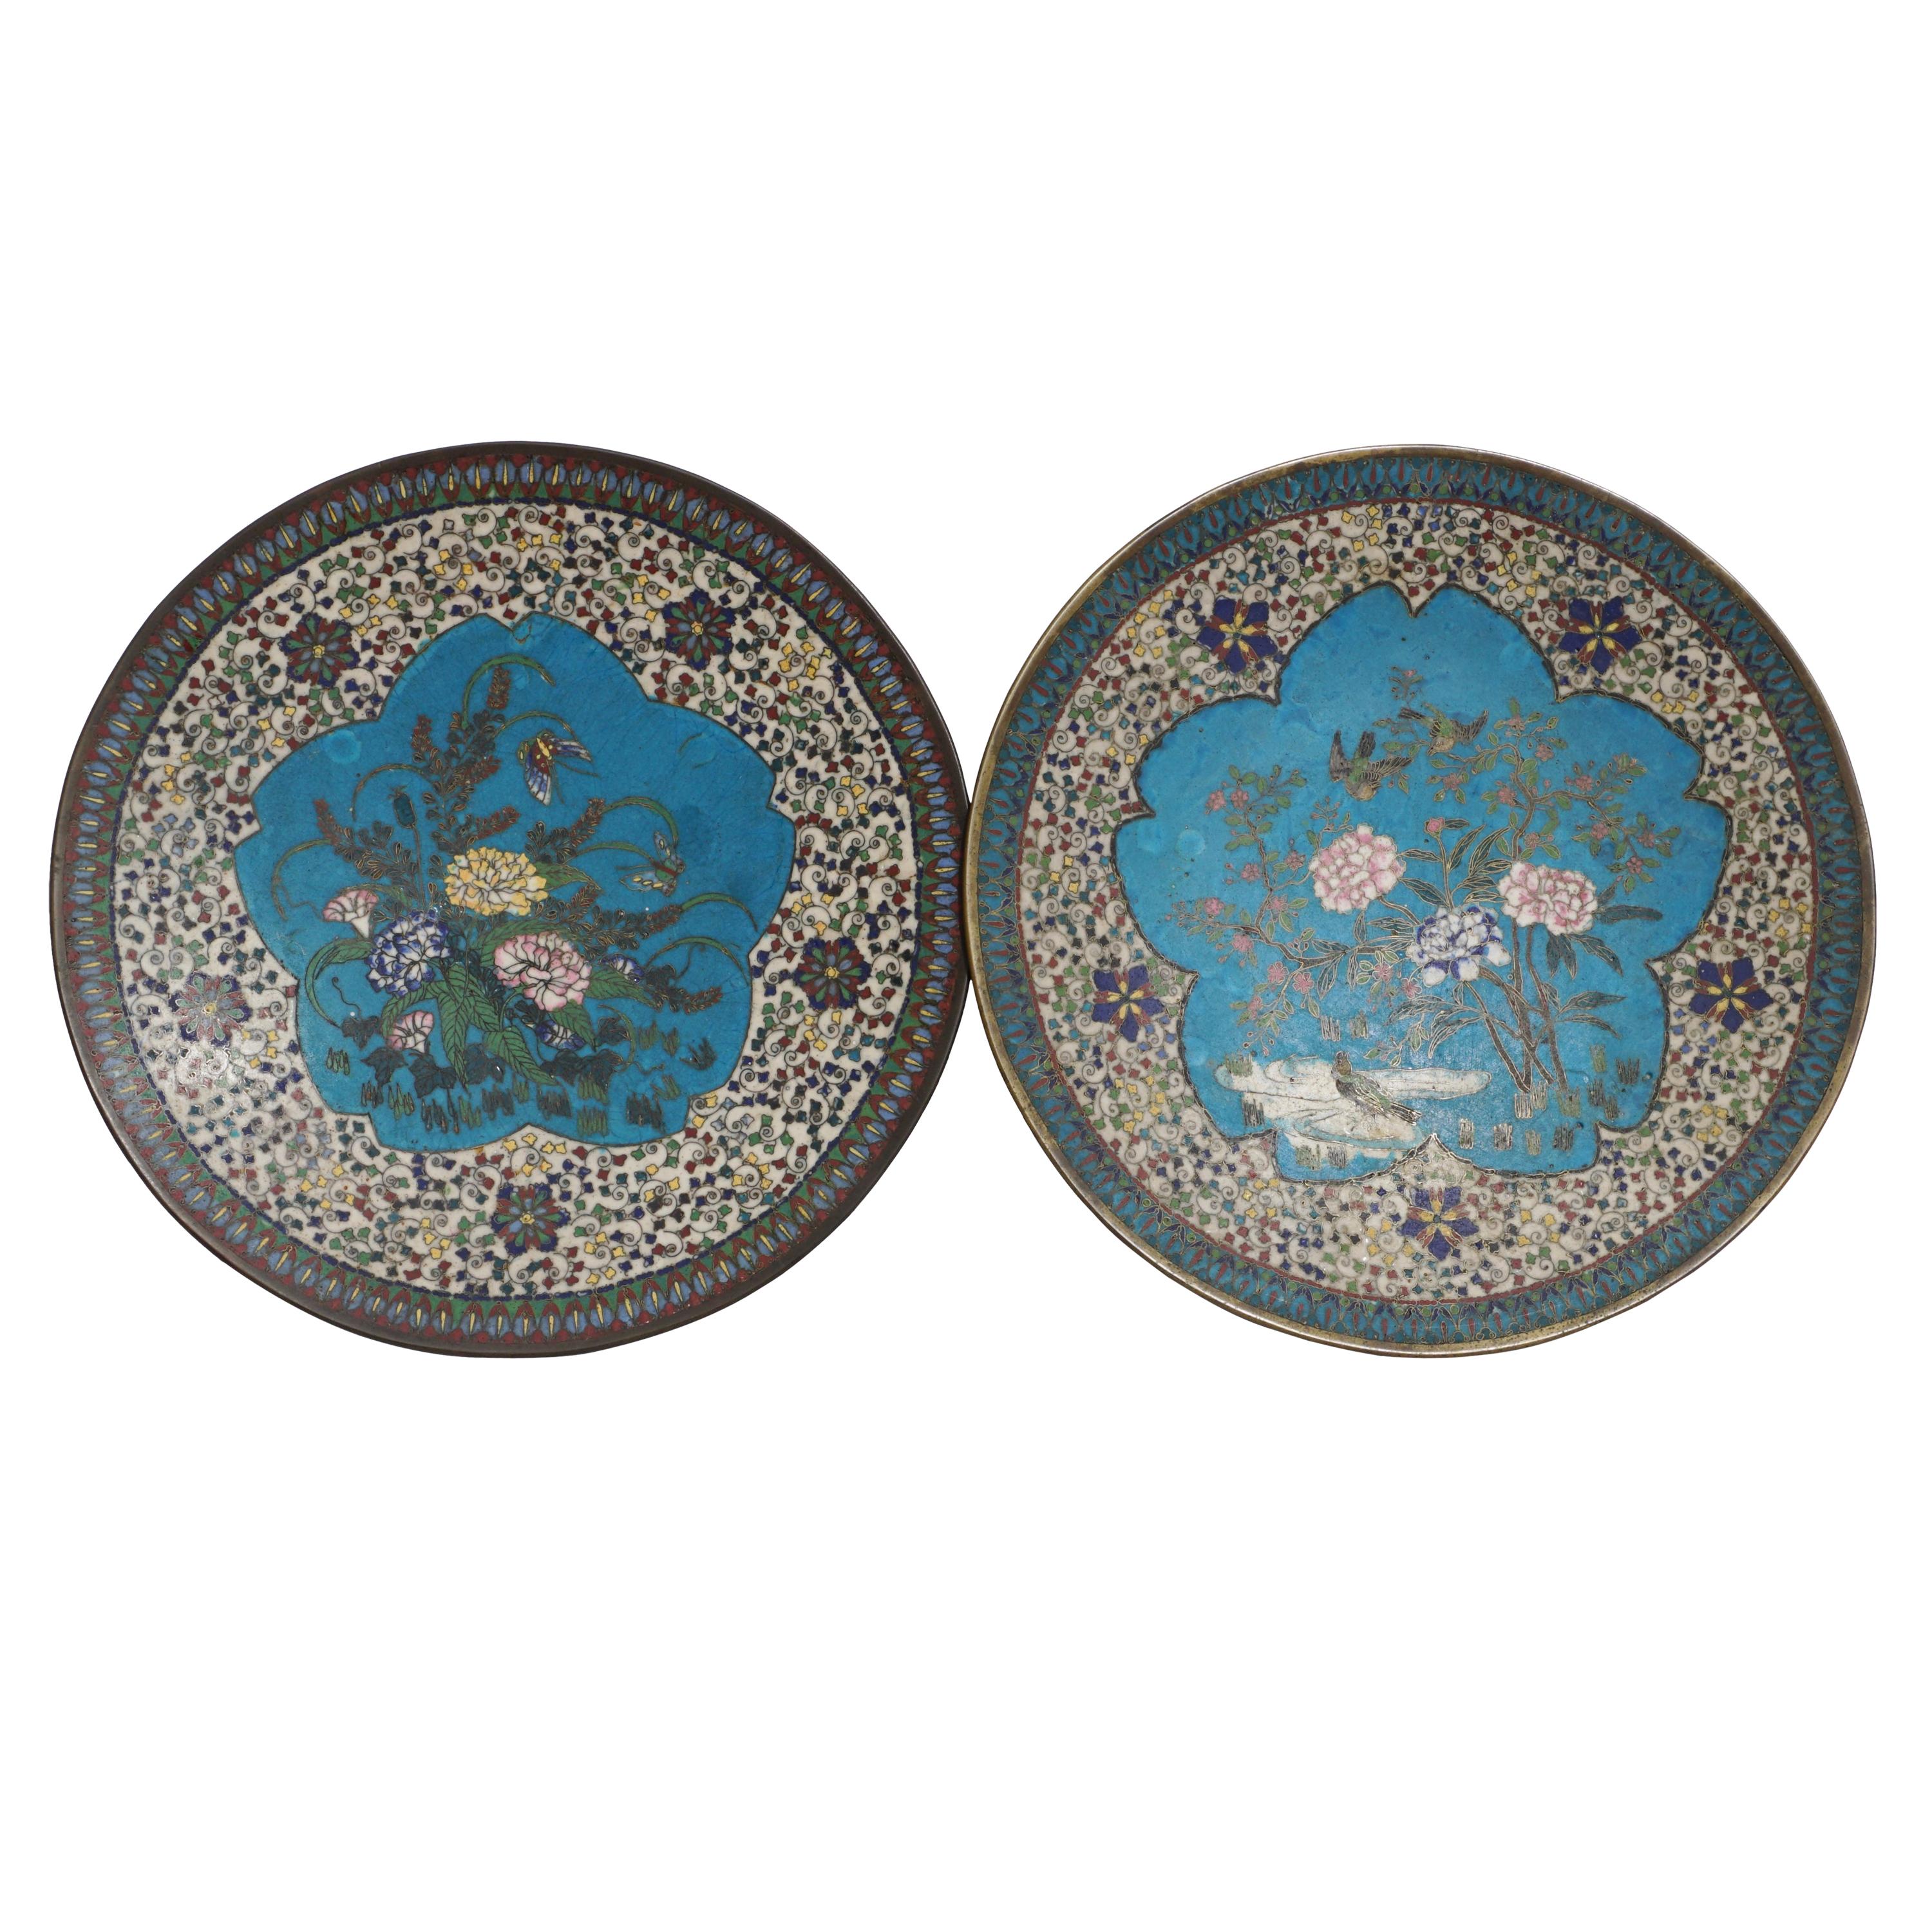 Pair of Japonese Meiji Cloisonne Chargers